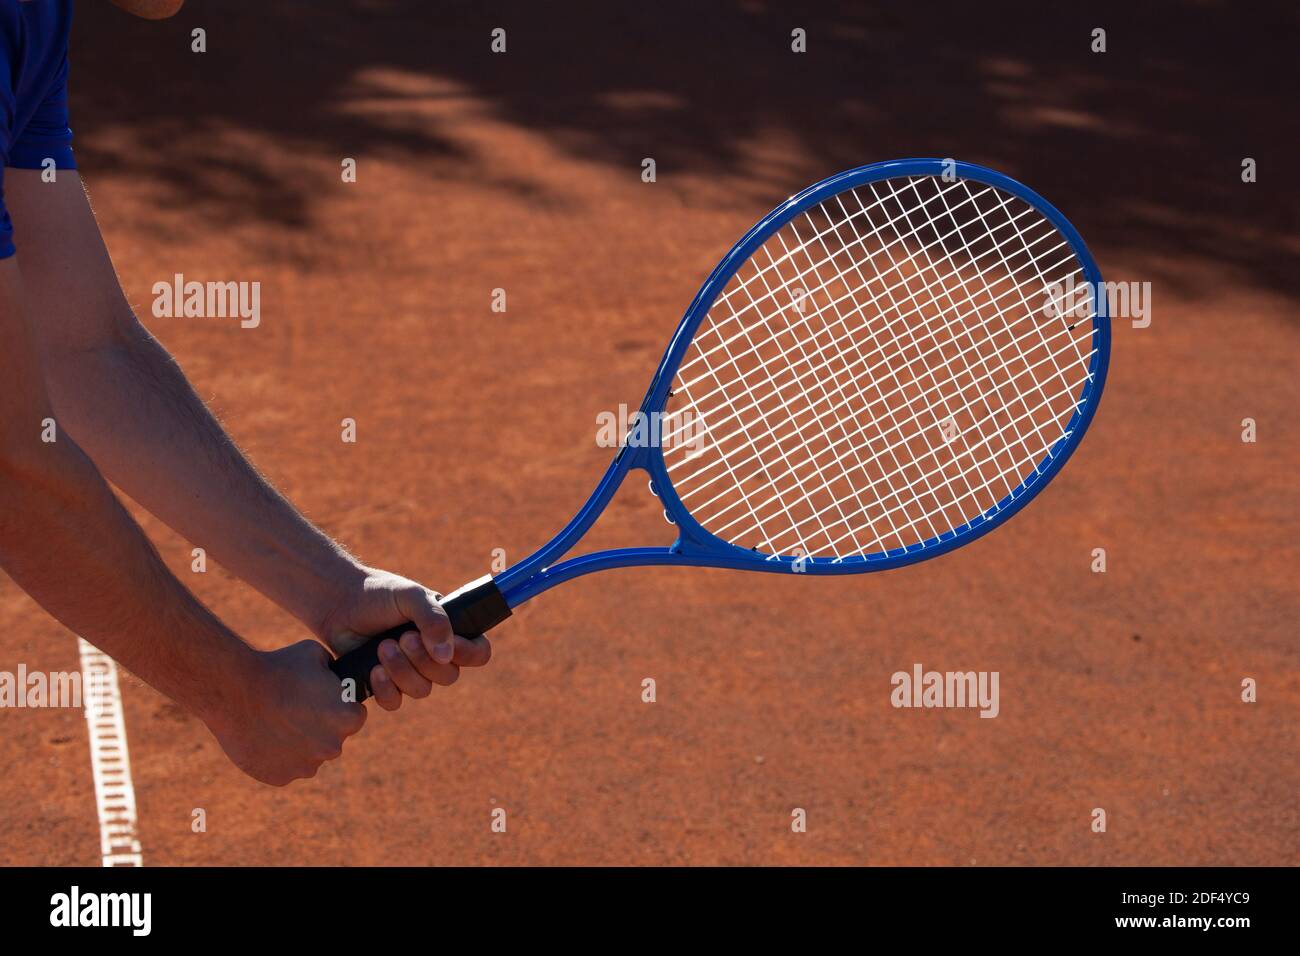 Tennis player holding a tennis racket in two hands in an expectation of the service of the opponent Stock Photo